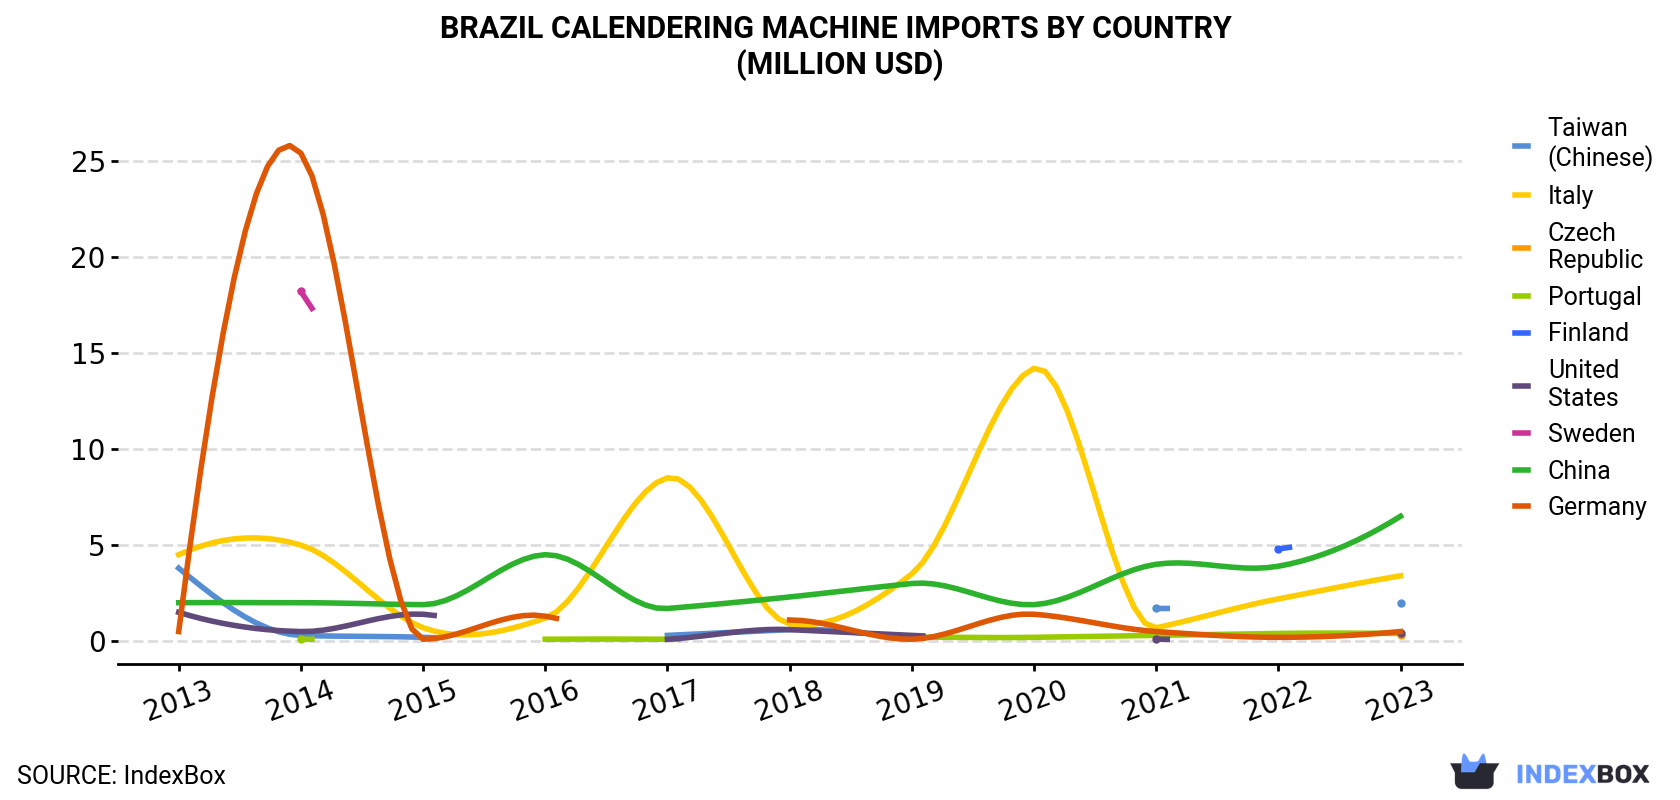 Brazil Calendering Machine Imports By Country (Million USD)